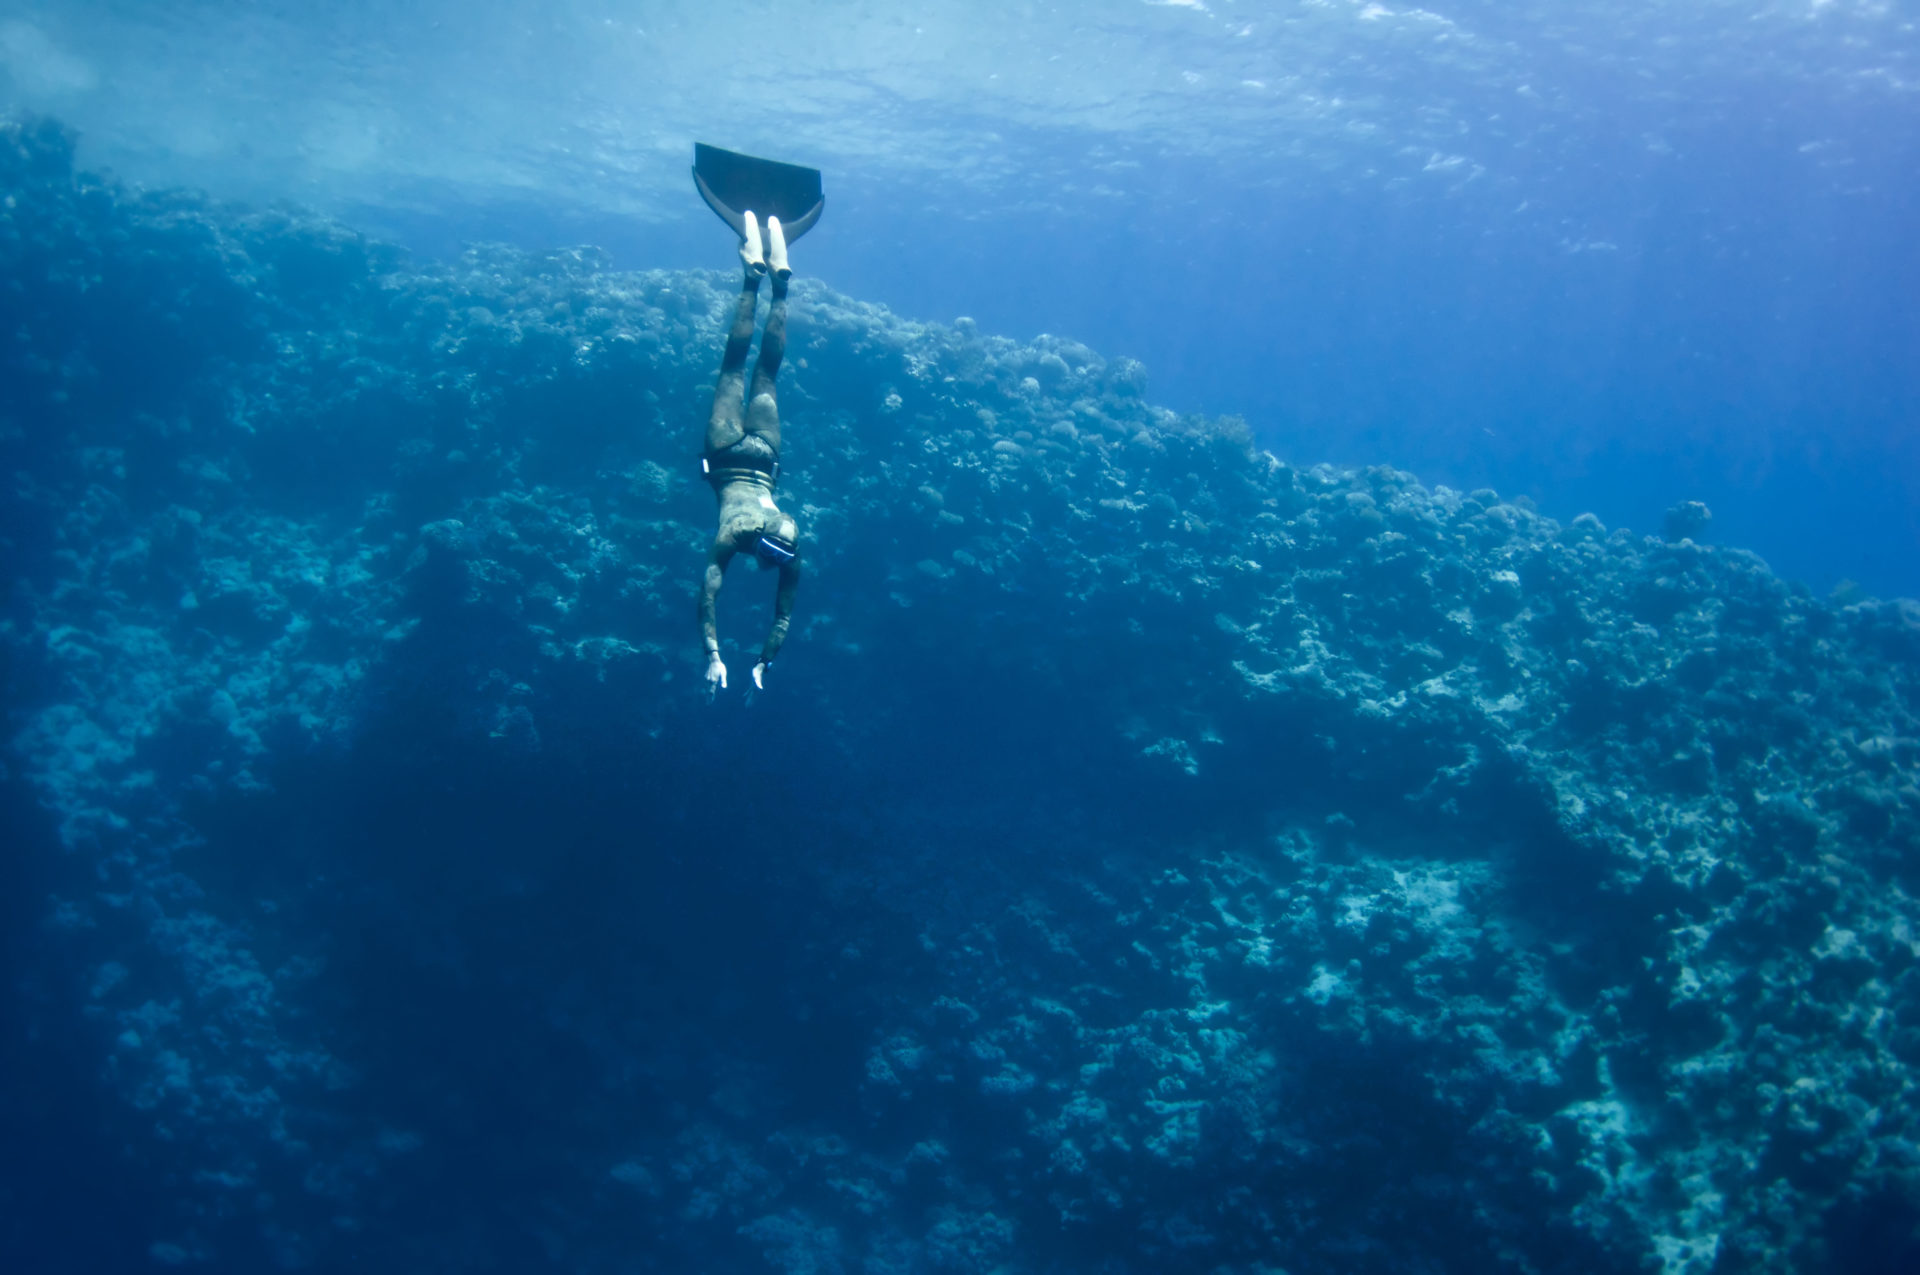 The freediver moves underwater near the coral reef at the depth of Blue Hole, Egypt